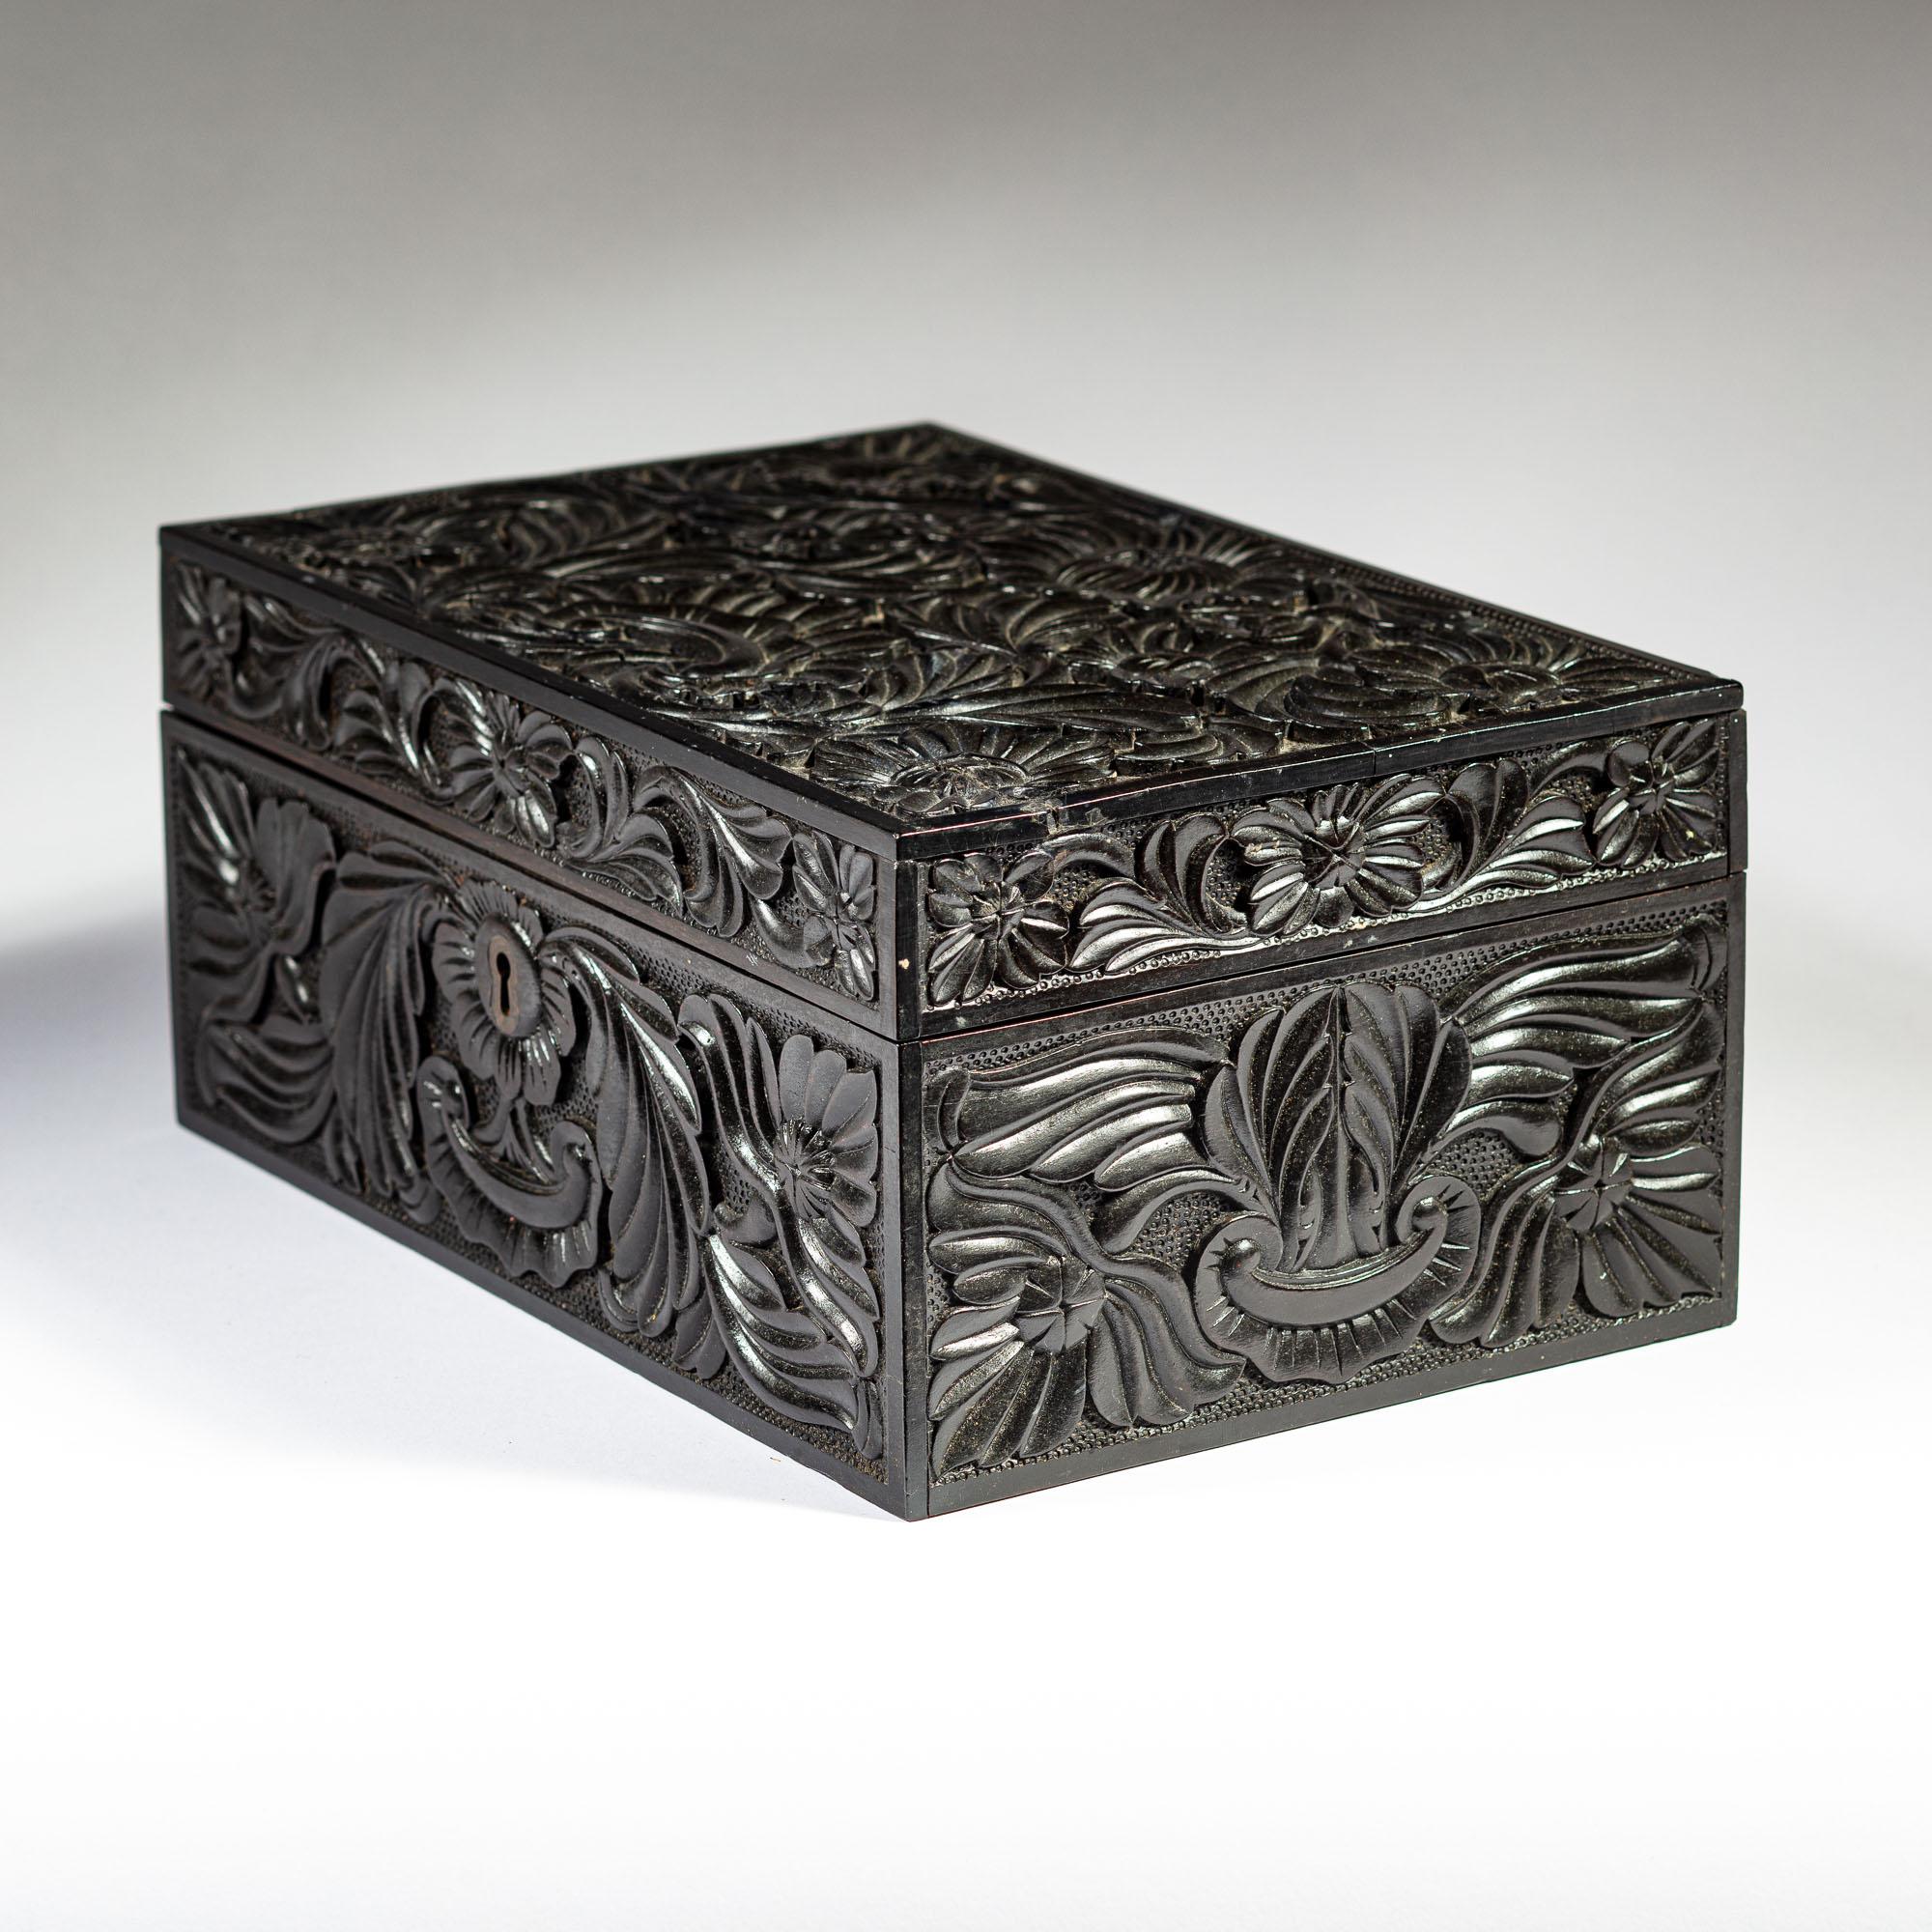 A rare mid 19th century carved ebony workbox, profusely carved with foliage and floral details on all sides, the lid opening to an inlaid bone elephant fitted interior with a removable tray. Retaining the original lock.

Ceylon, circa